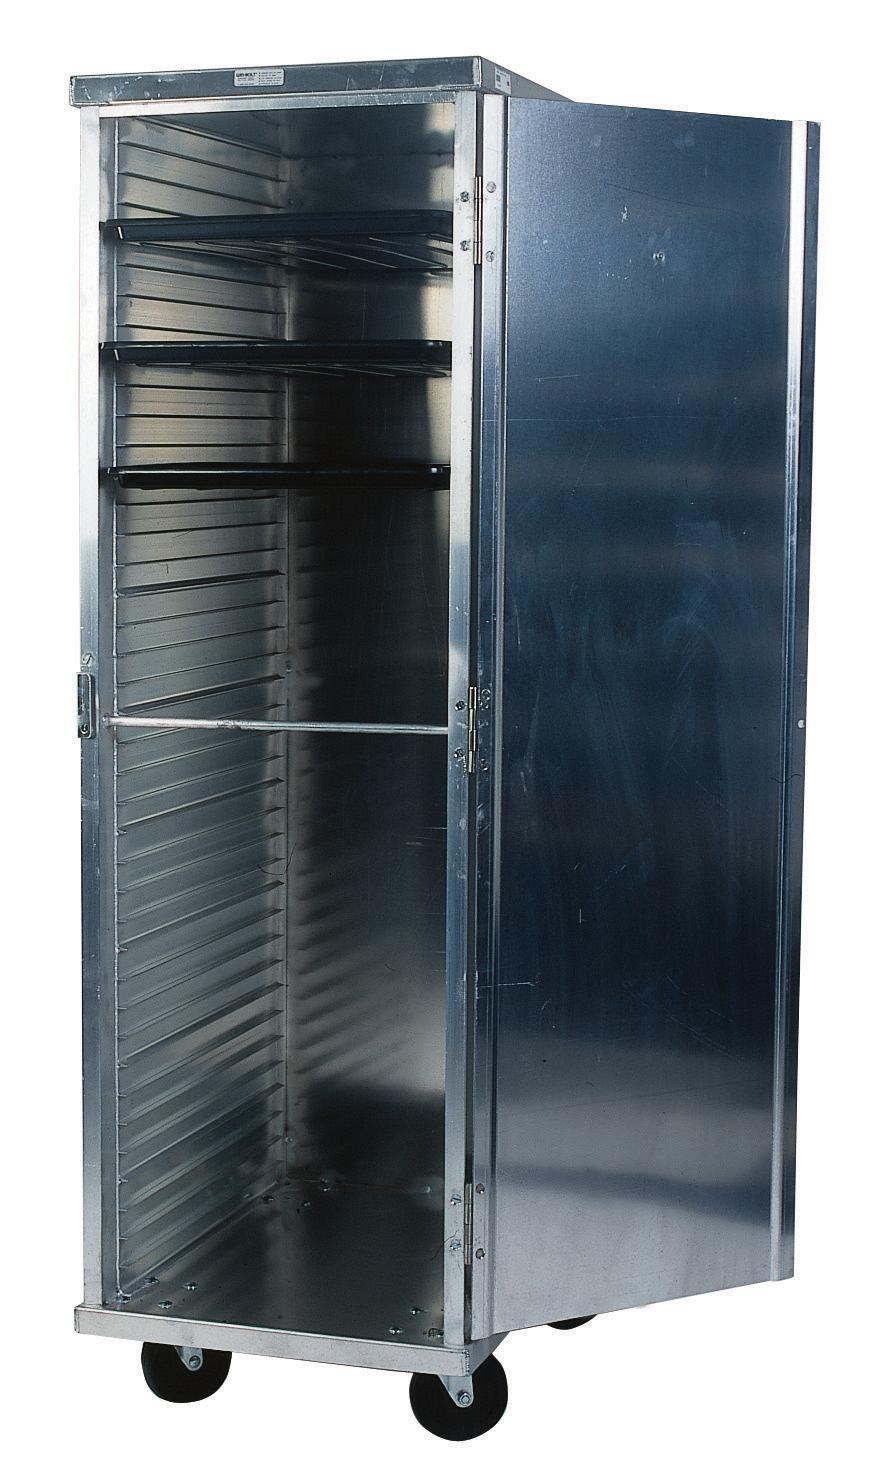 Heater Proofers & Cabinets Enclosed Mobile Transport Cabinets ll Stores and transport goods retards dehydration! All welded, reinforced, noninsulated aluminum. Sanitary and rustproof.